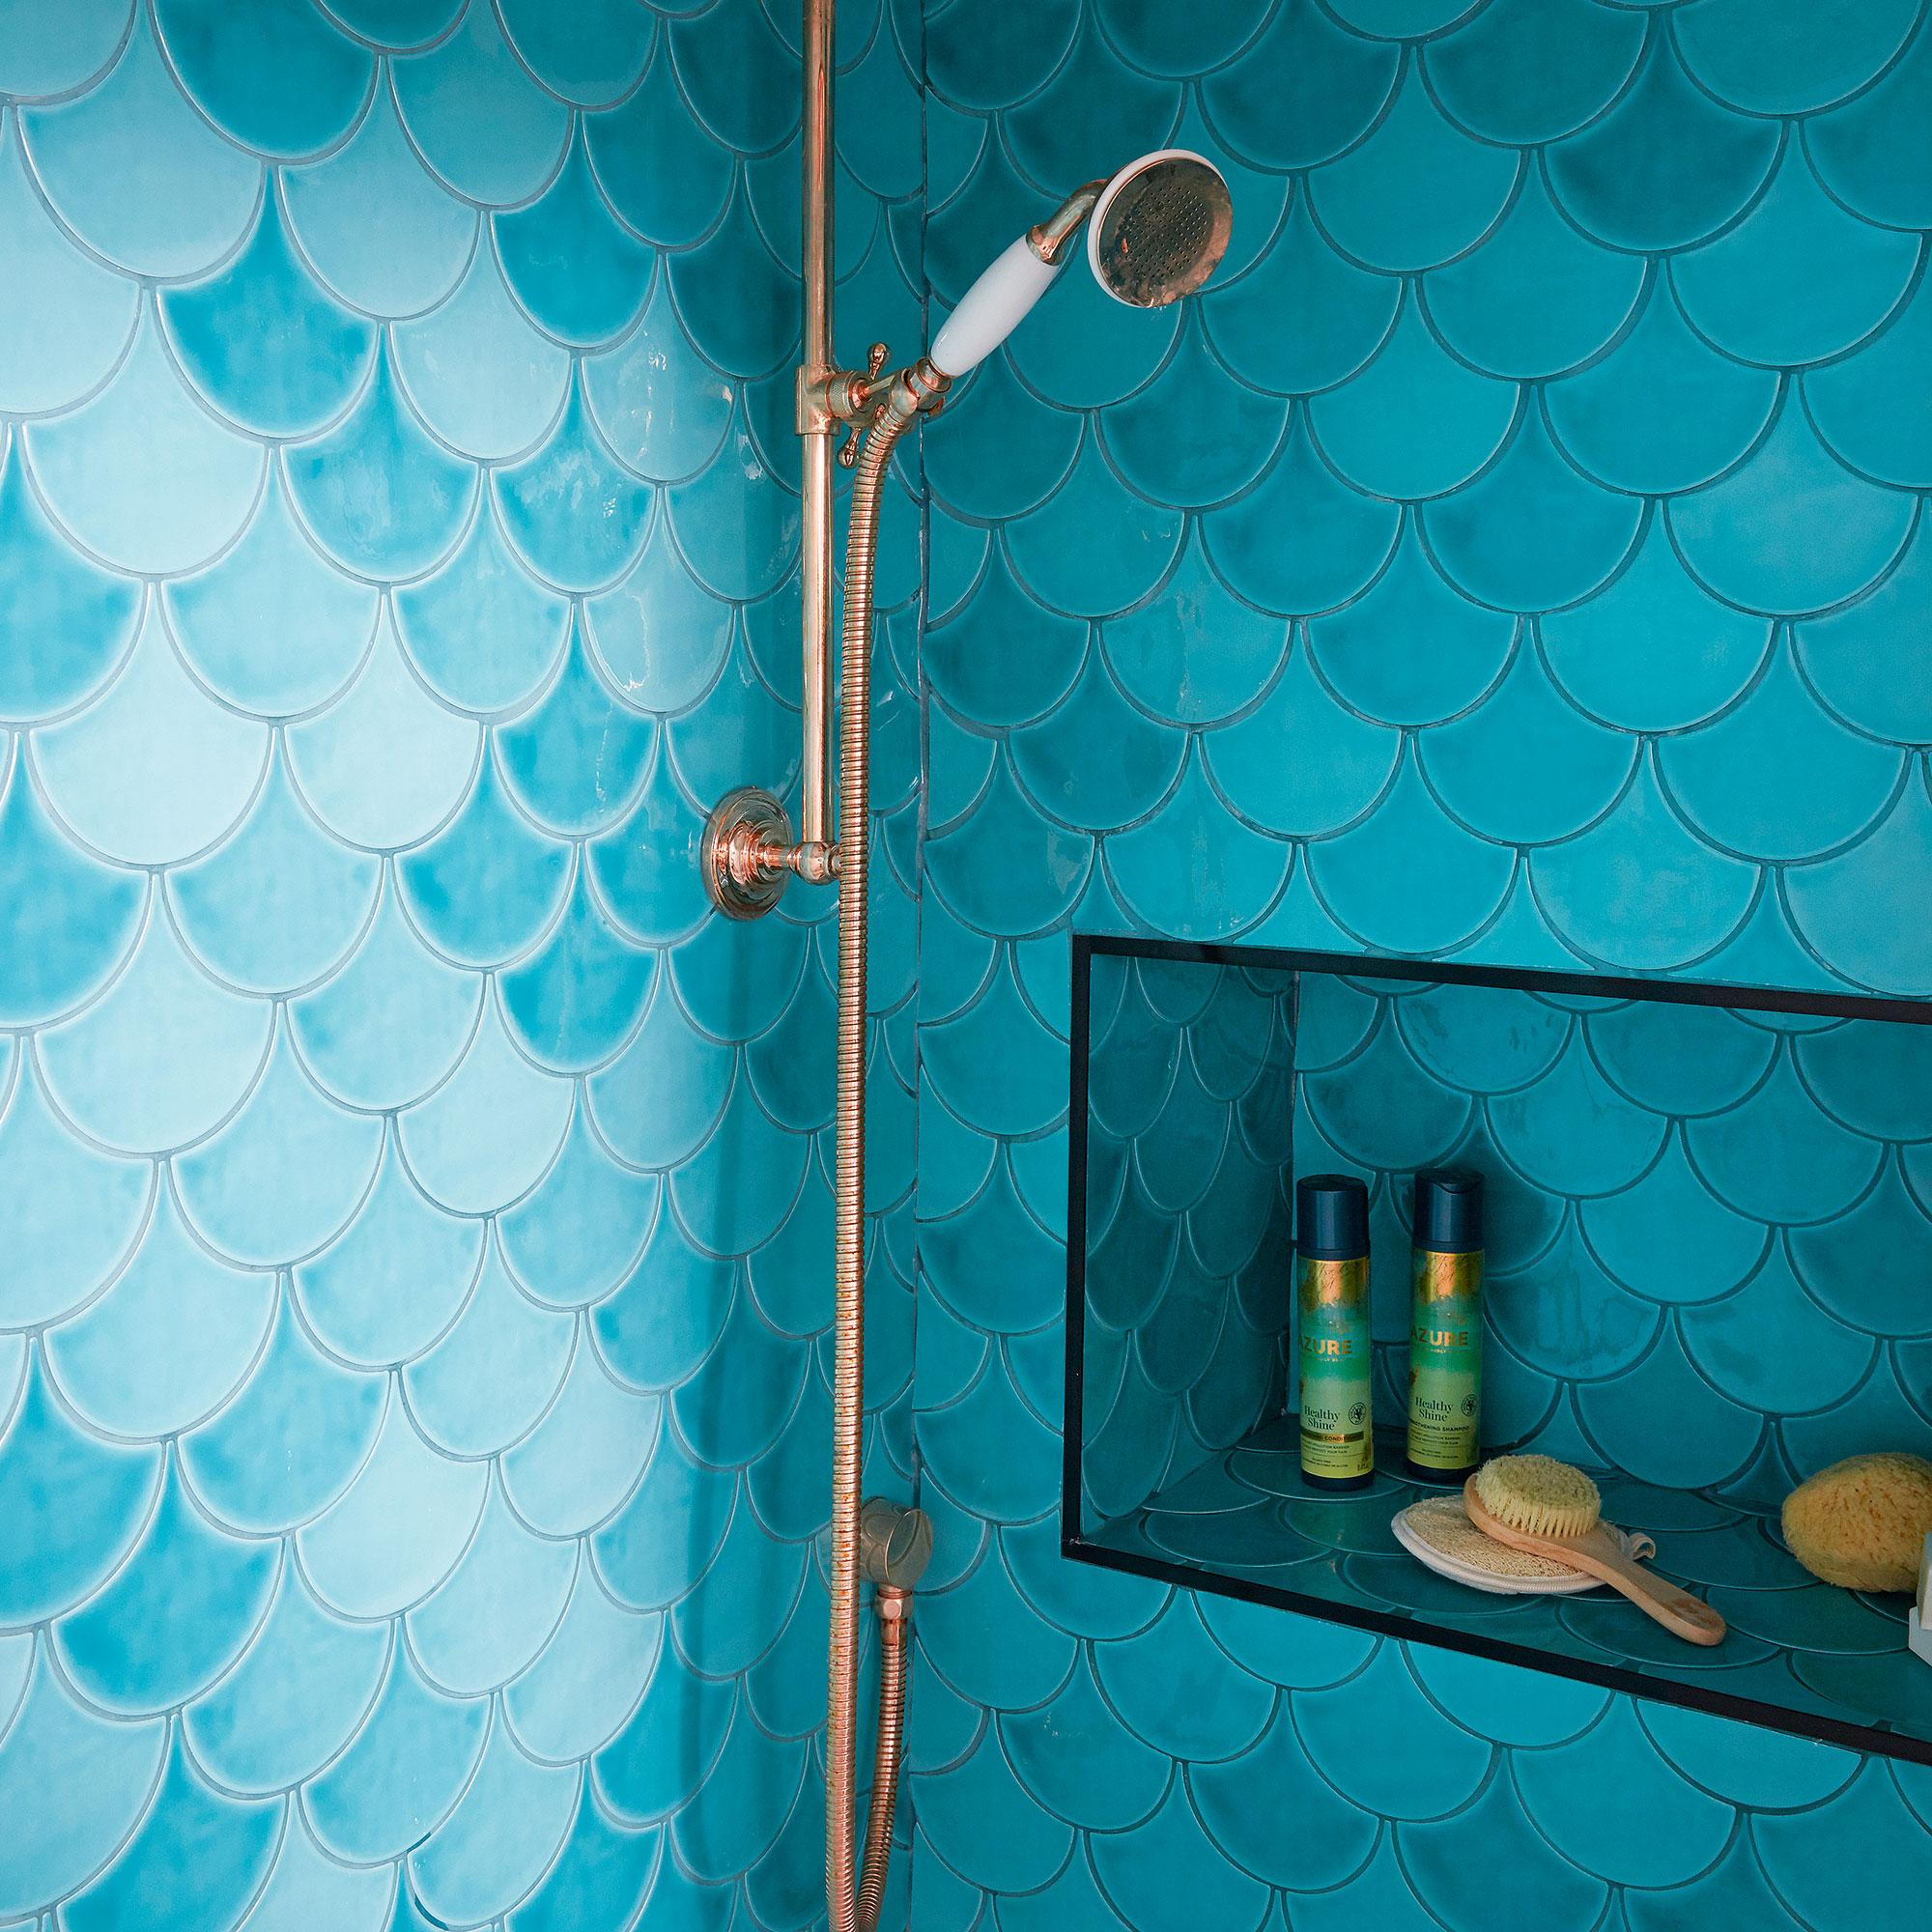 Shower covered in turquoise blue scalloped tiles